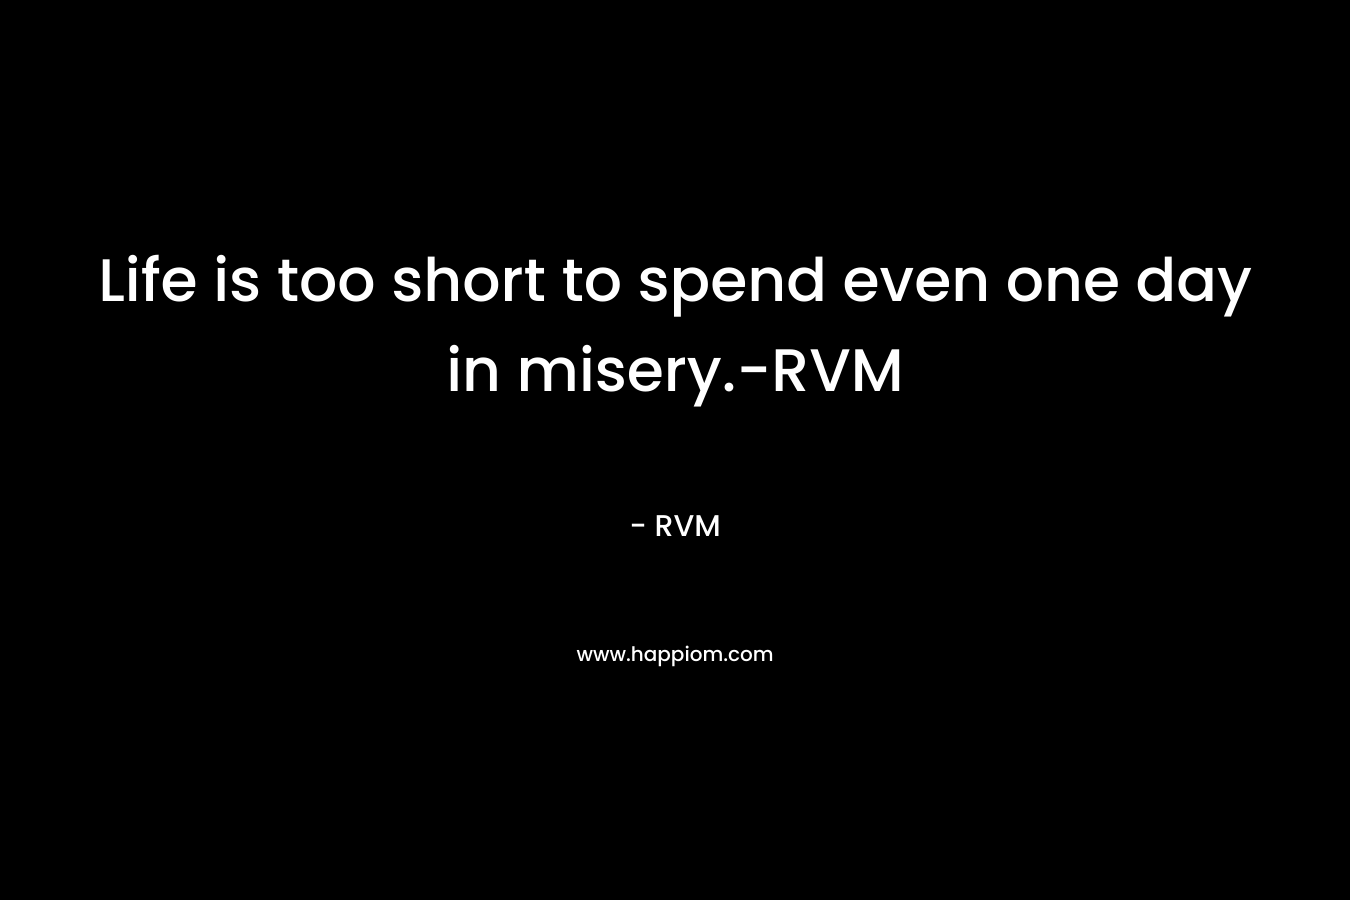 Life is too short to spend even one day in misery.-RVM